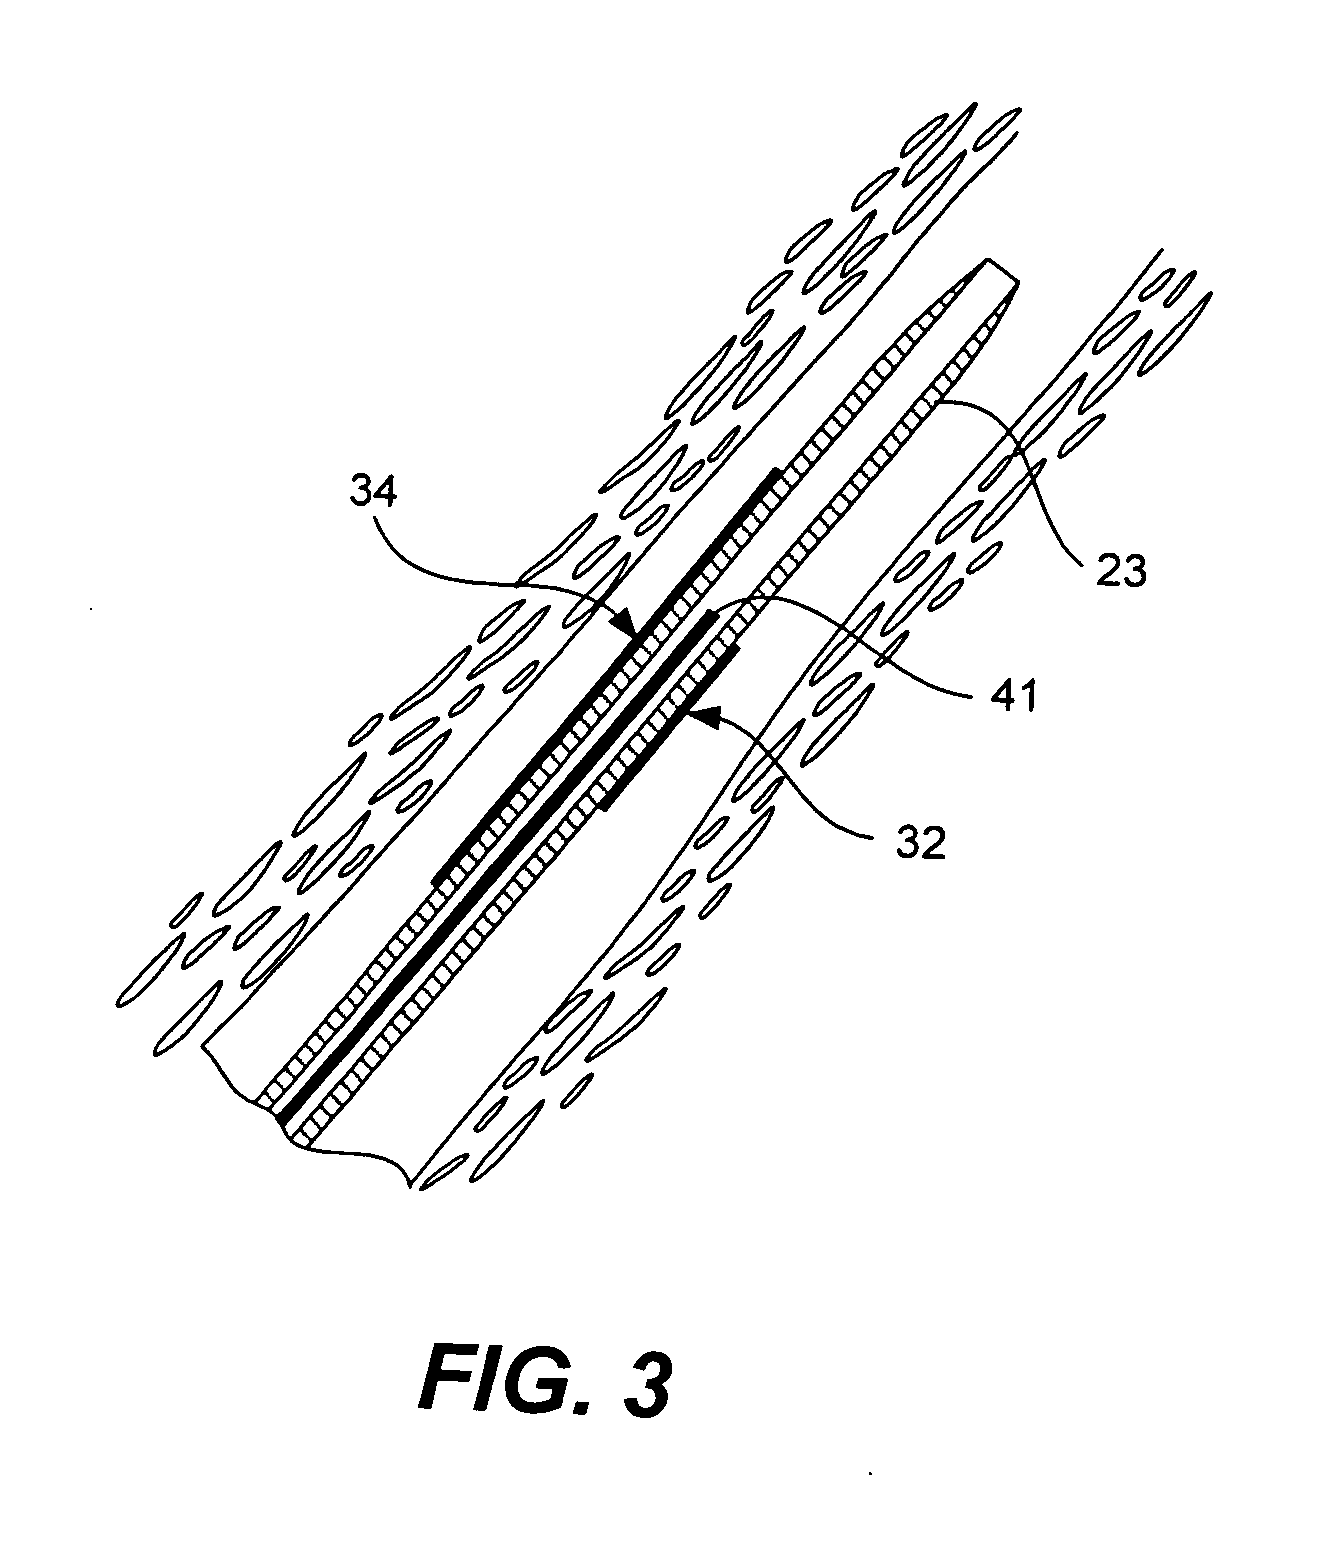 Catheter having markers to indicate rotational orientation